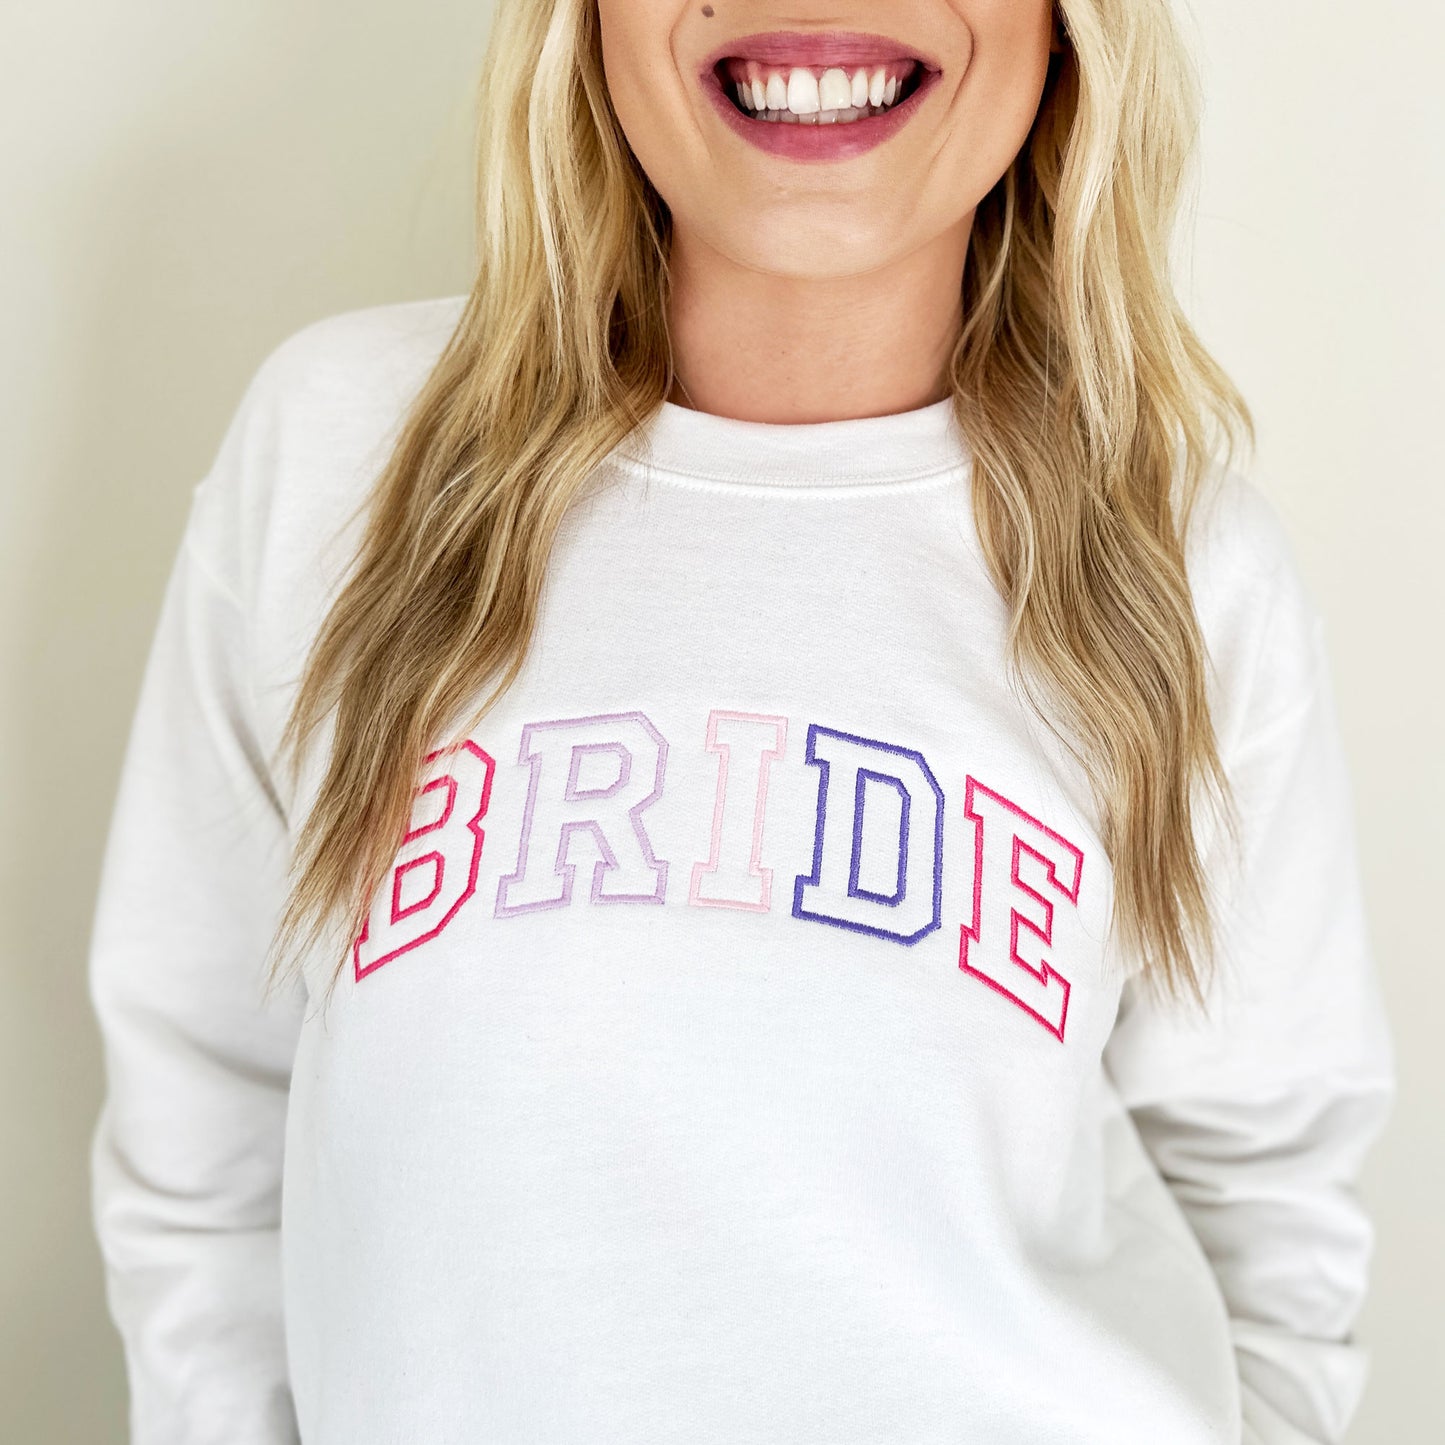 woman wearing a white sweatshirt with a custom BRIDE embroidered design across the chest in a cute pink and purple thread pattern